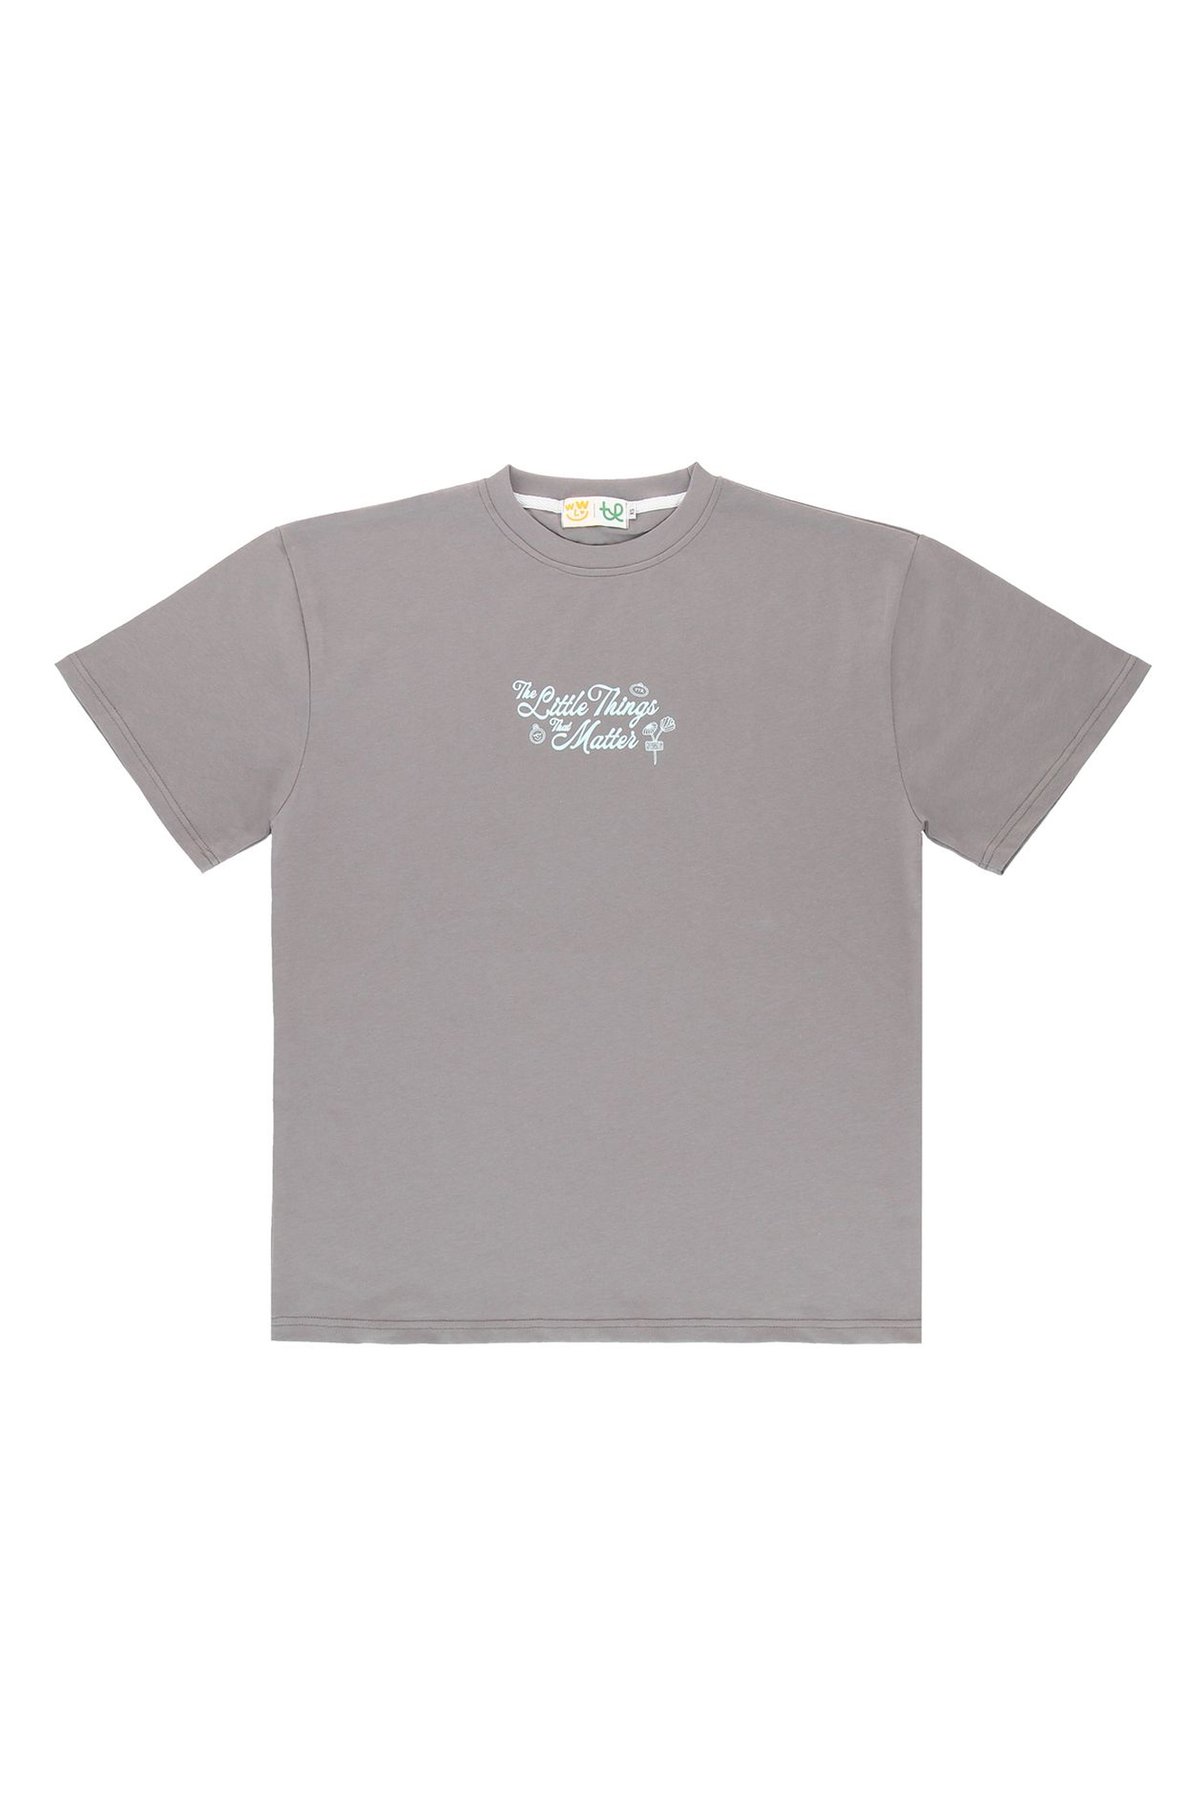 The Little Things That Matter Oversized Tee (Graphite)